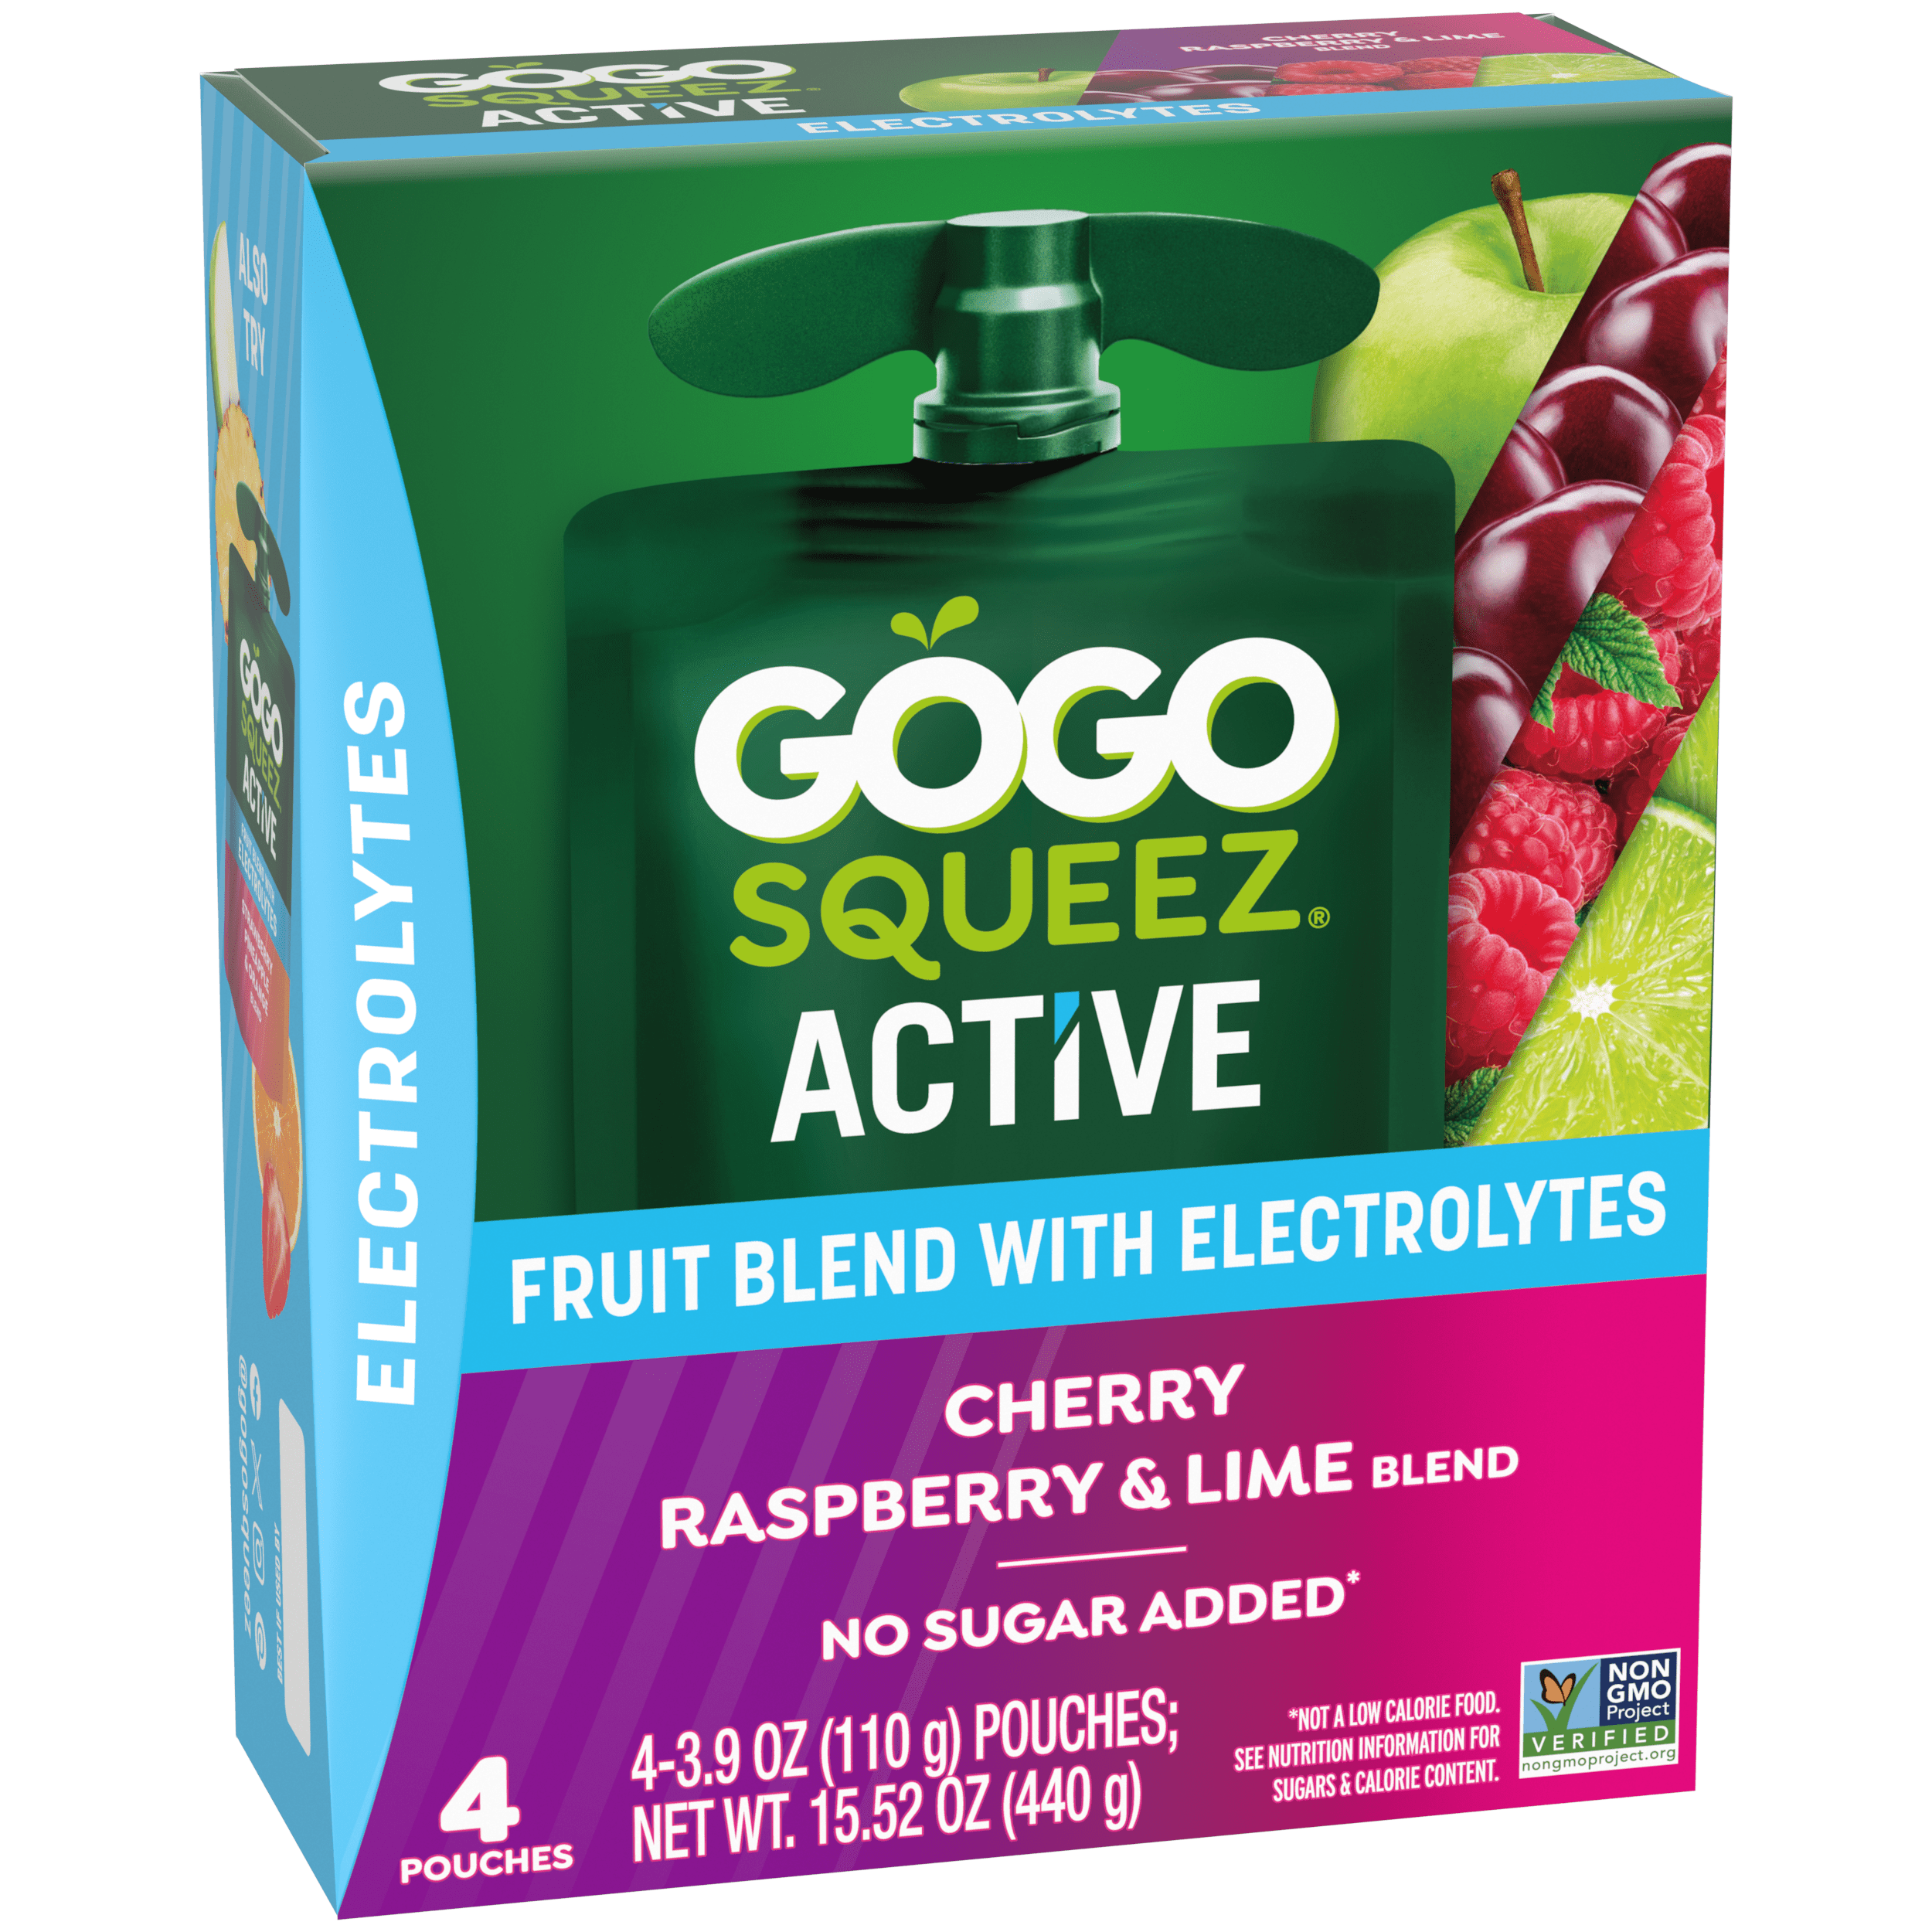 Gogo Squeez Active Fruit Blend With Electrolytes Cherry, Raspberry & Lime 4 pack Product Box